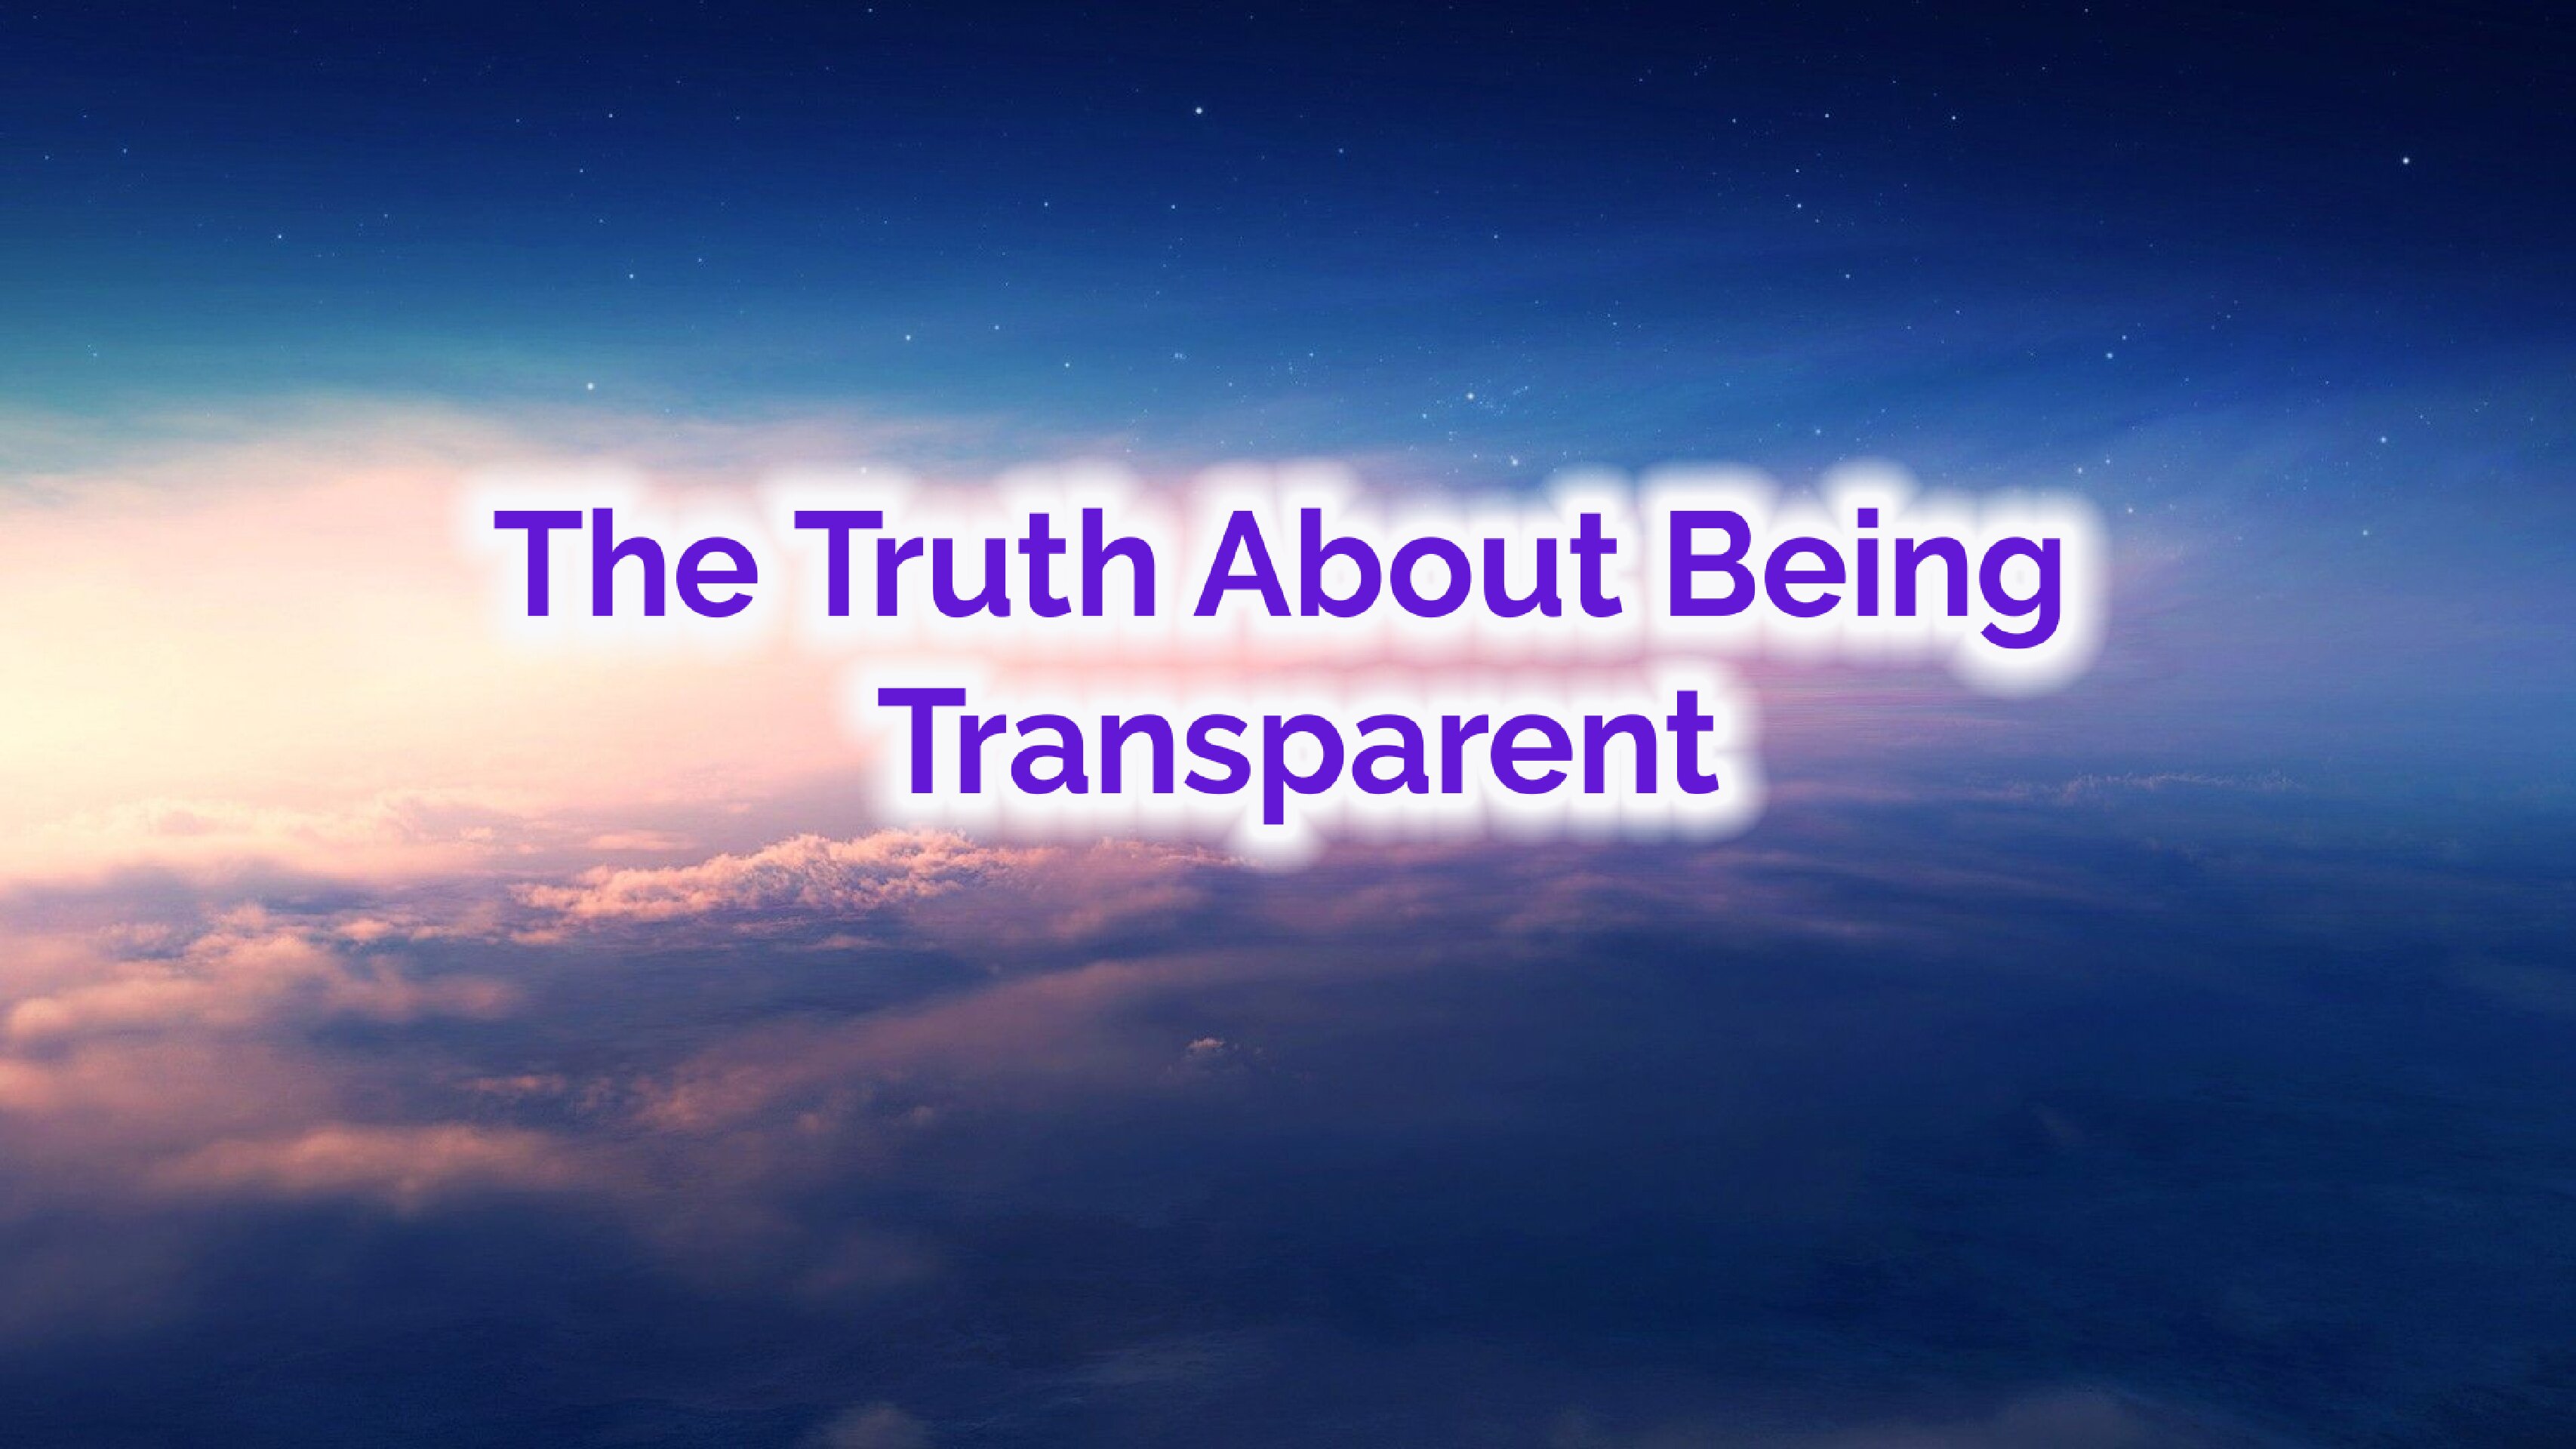 The Truth About Being Transparent